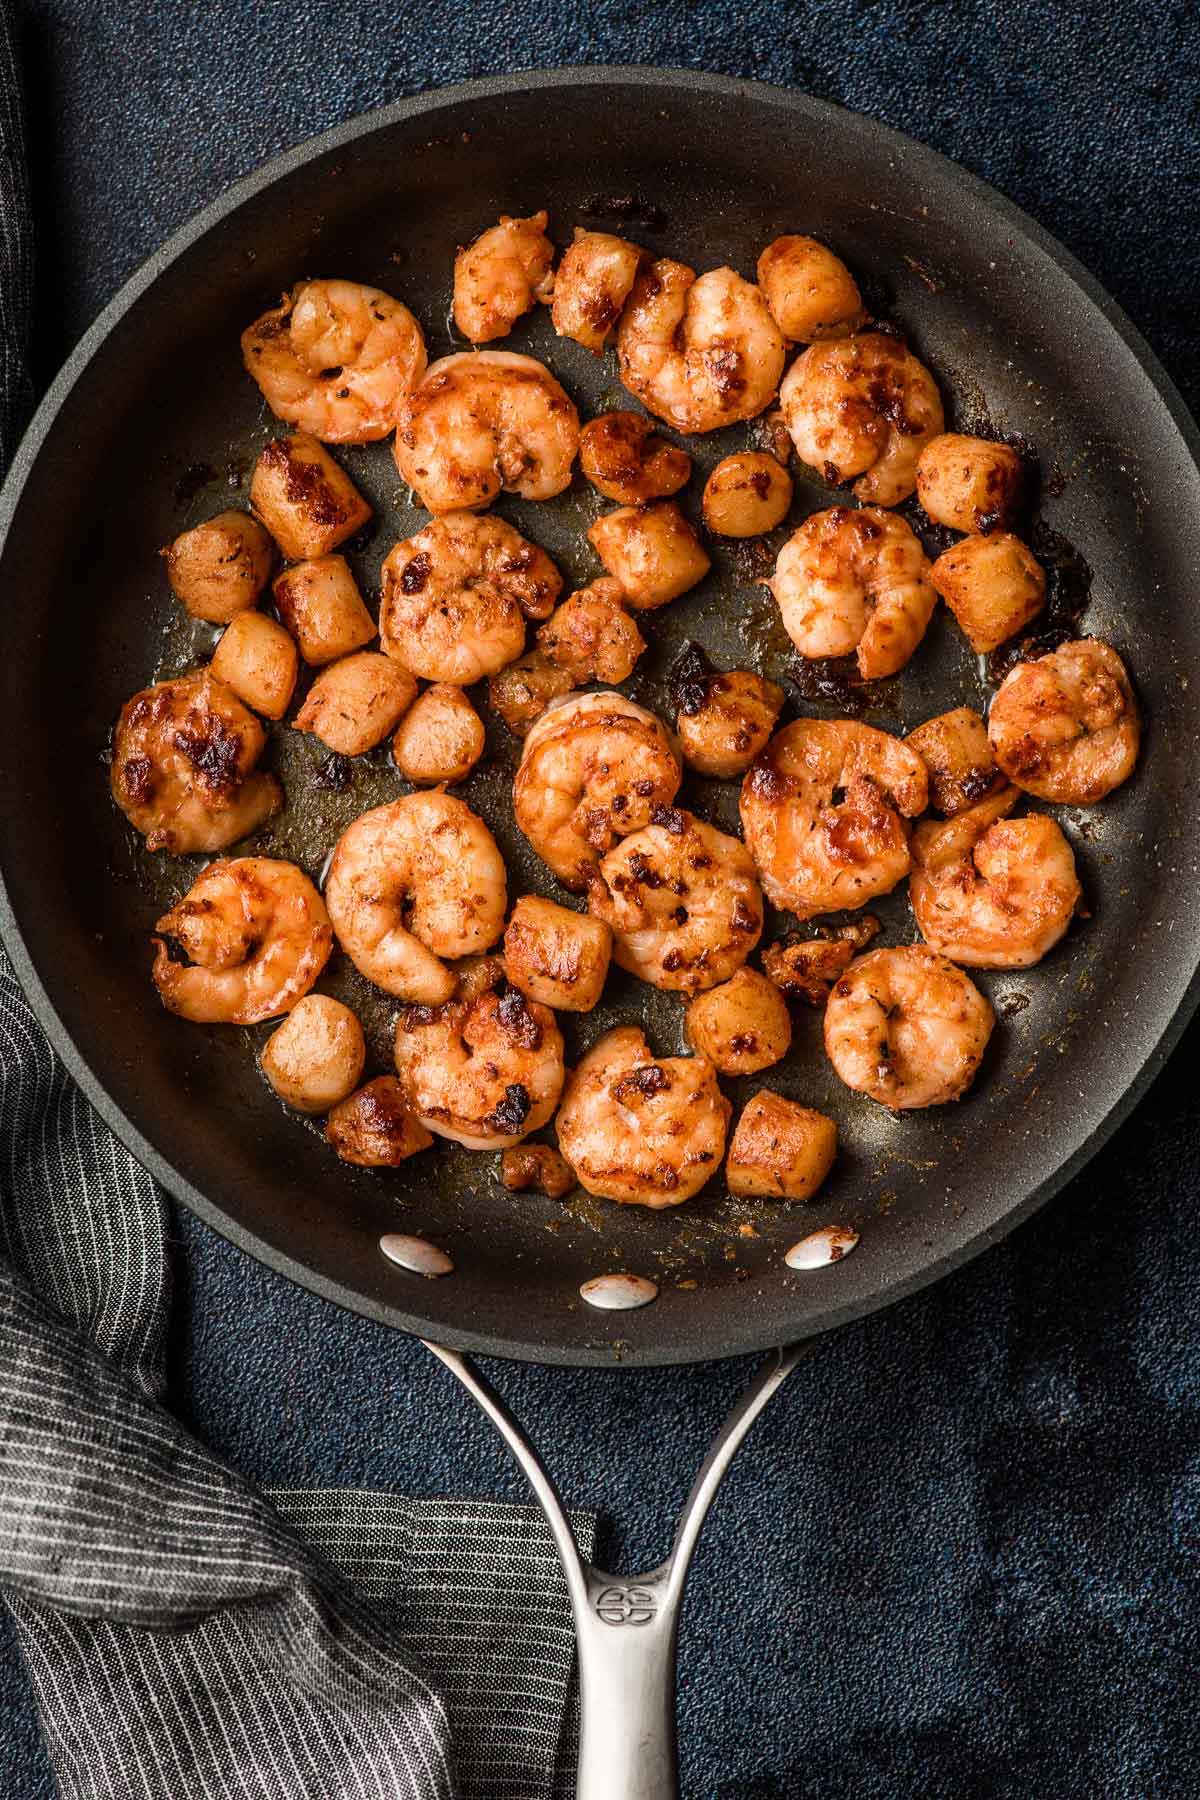 Cooked Shrimp and Scallops